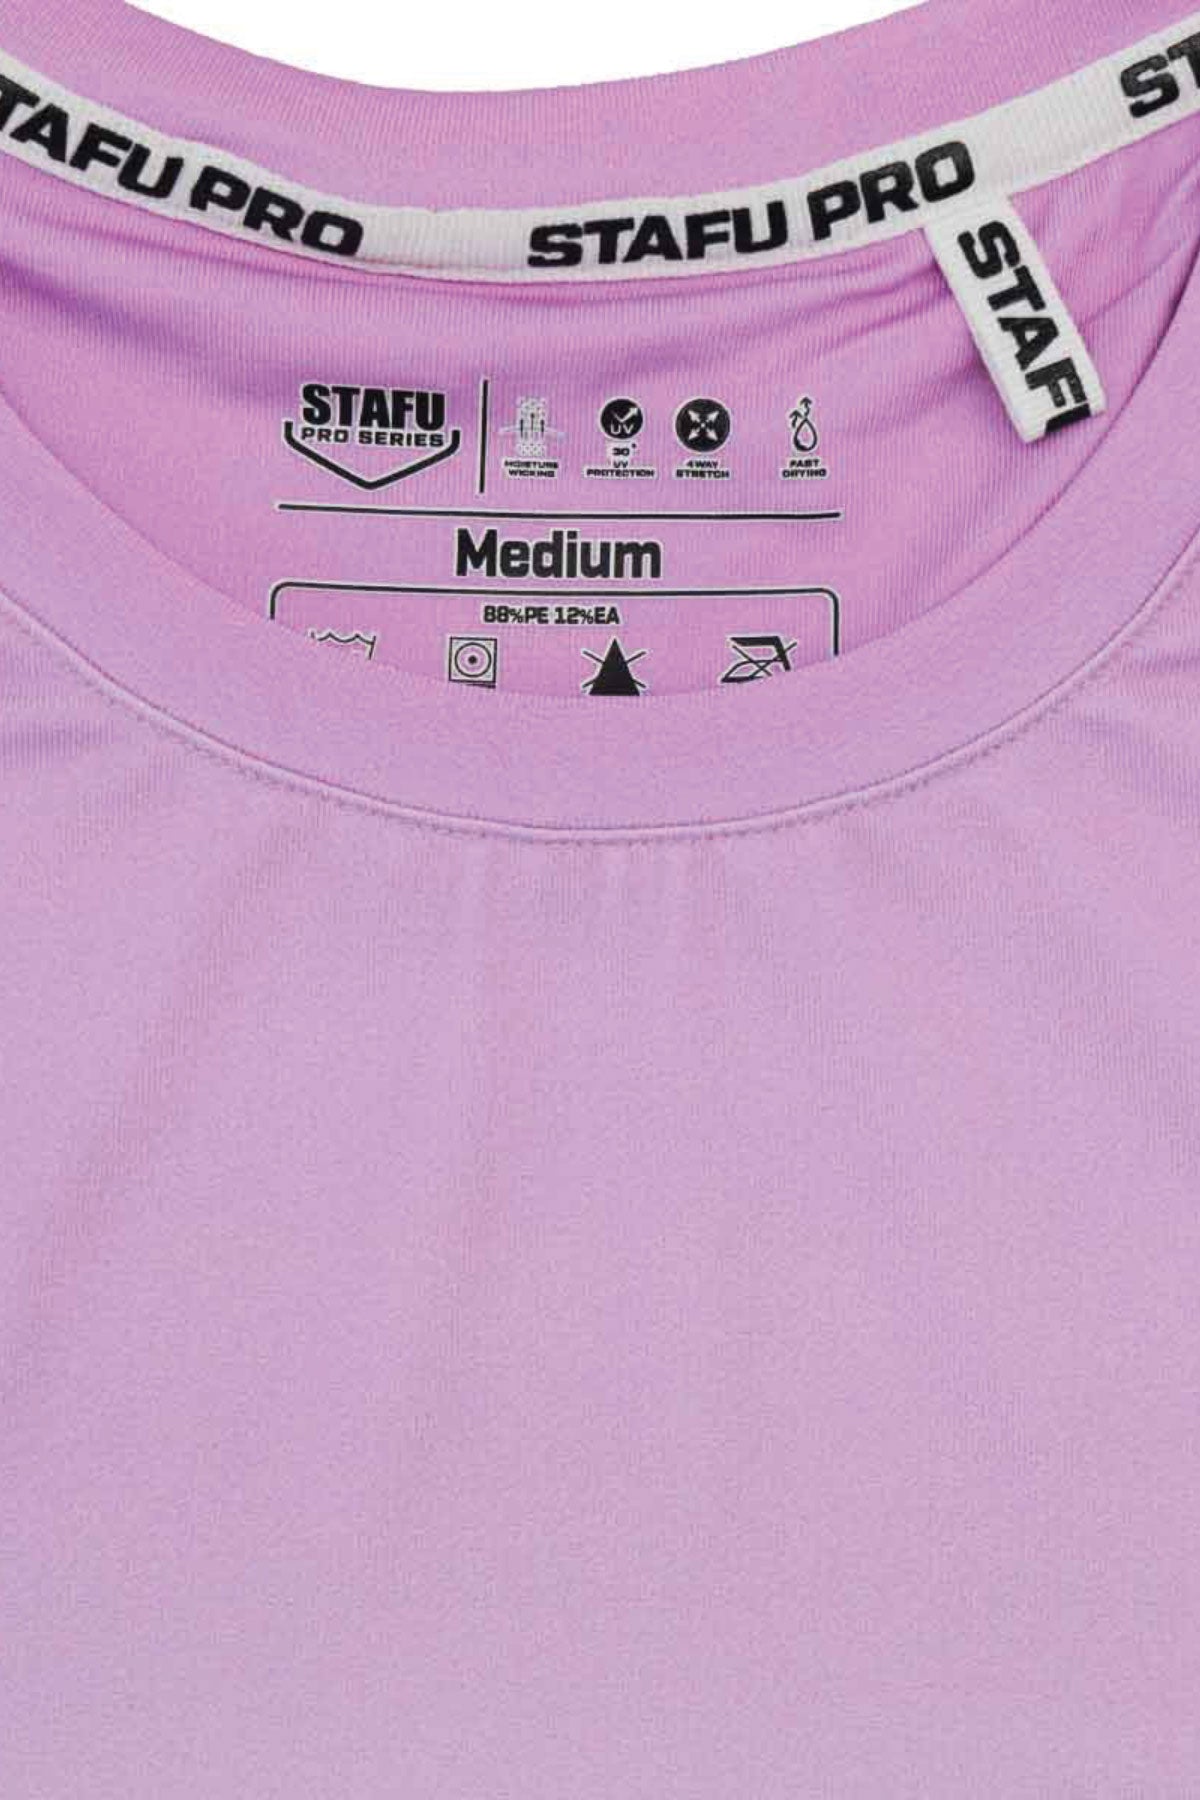 Ahoy  Long And Short Sleeve Together Fishing Shirt -Pink - Stafu Pro Series